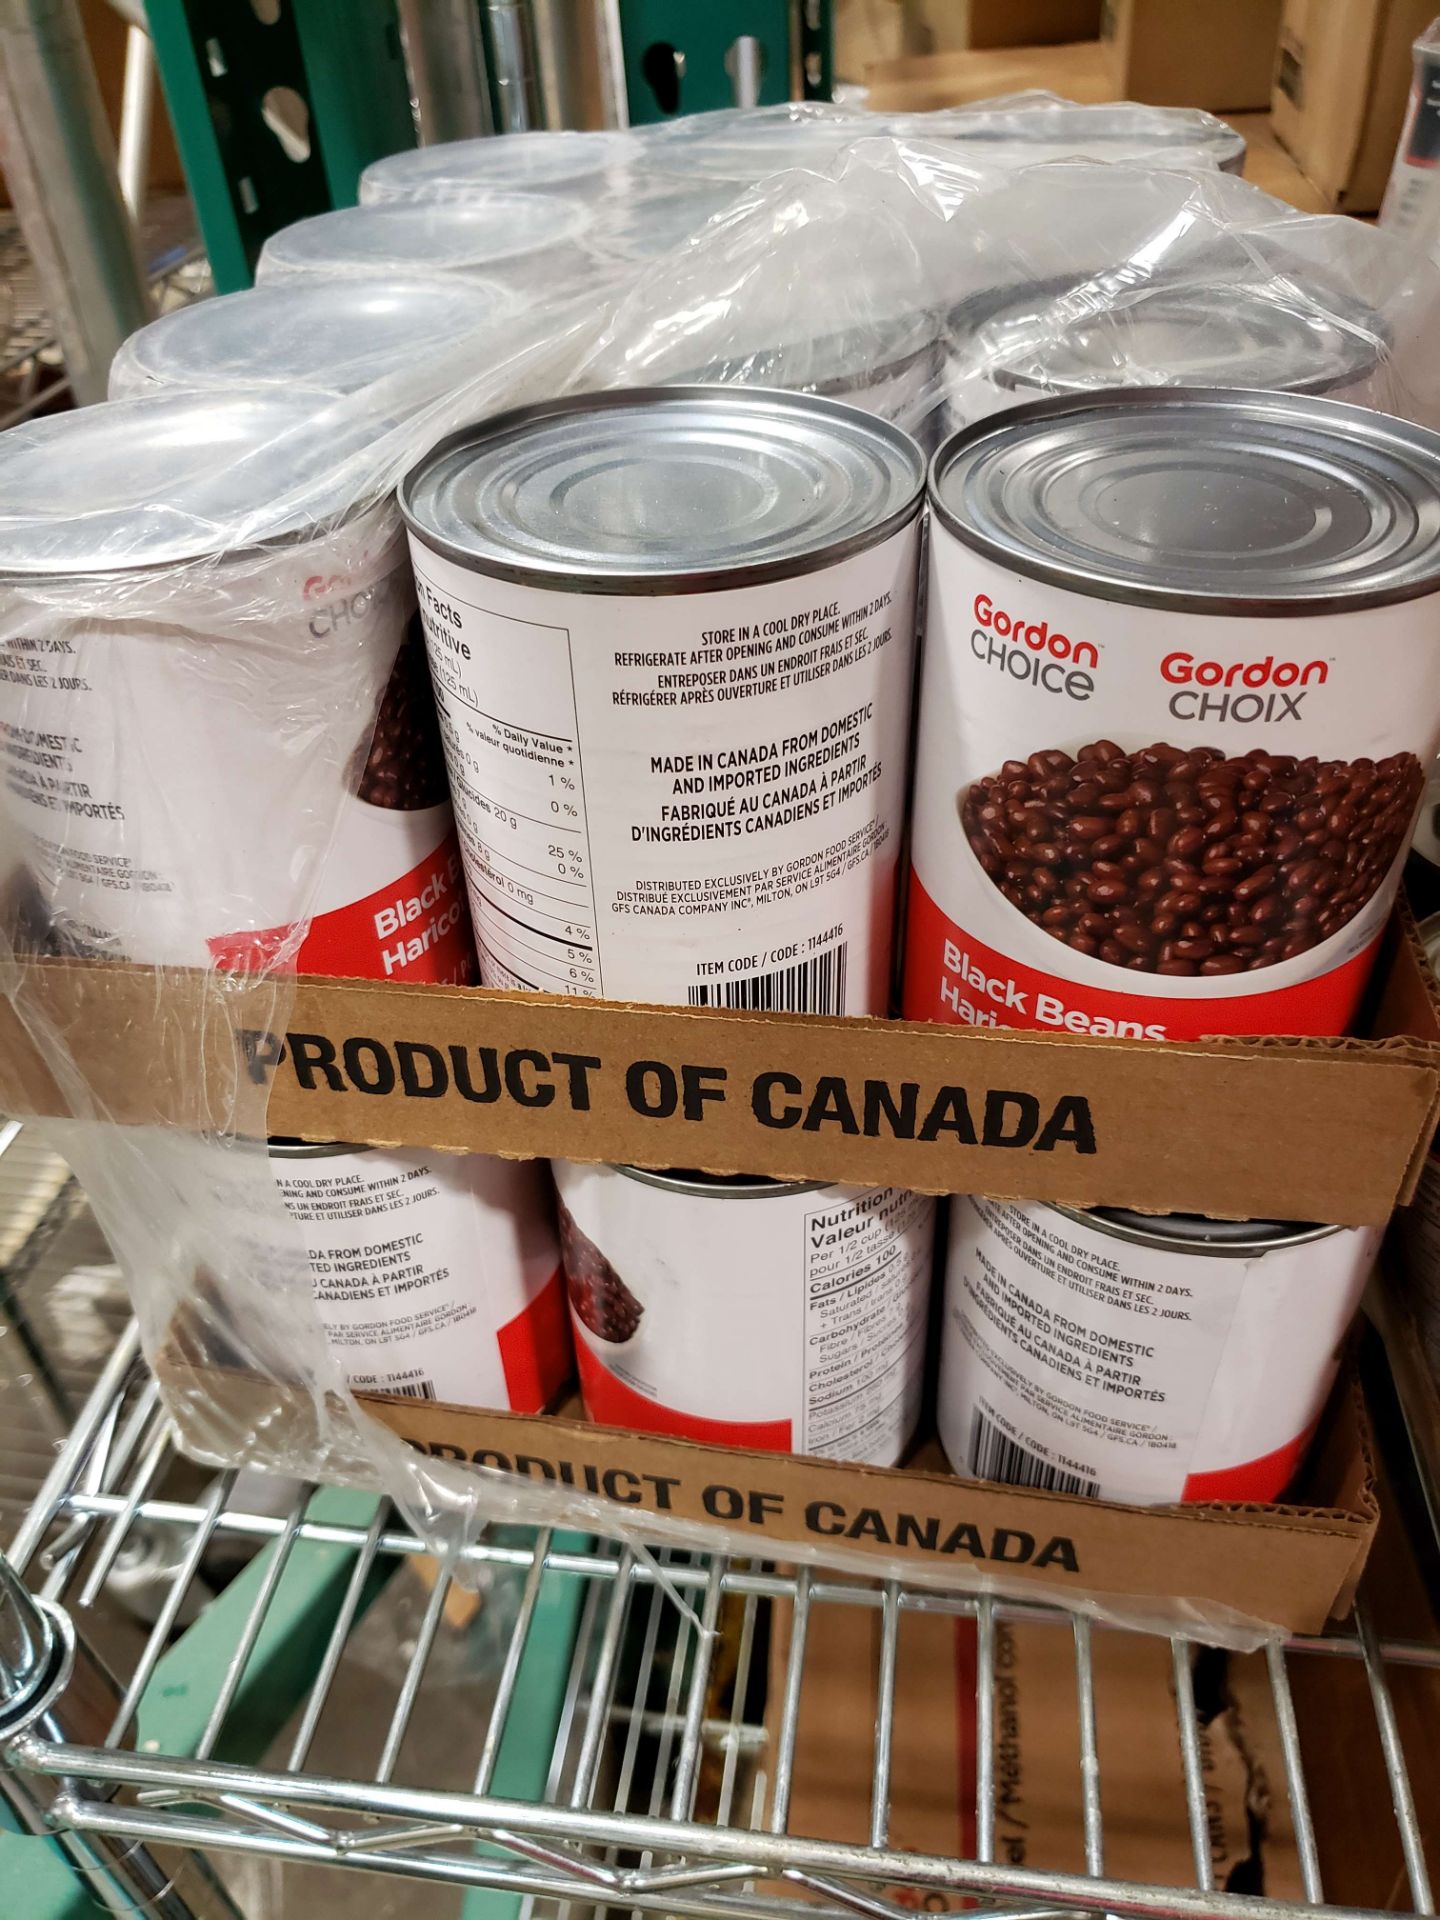 Black Beans - 24 x 540 ml Cans - Image 2 of 2